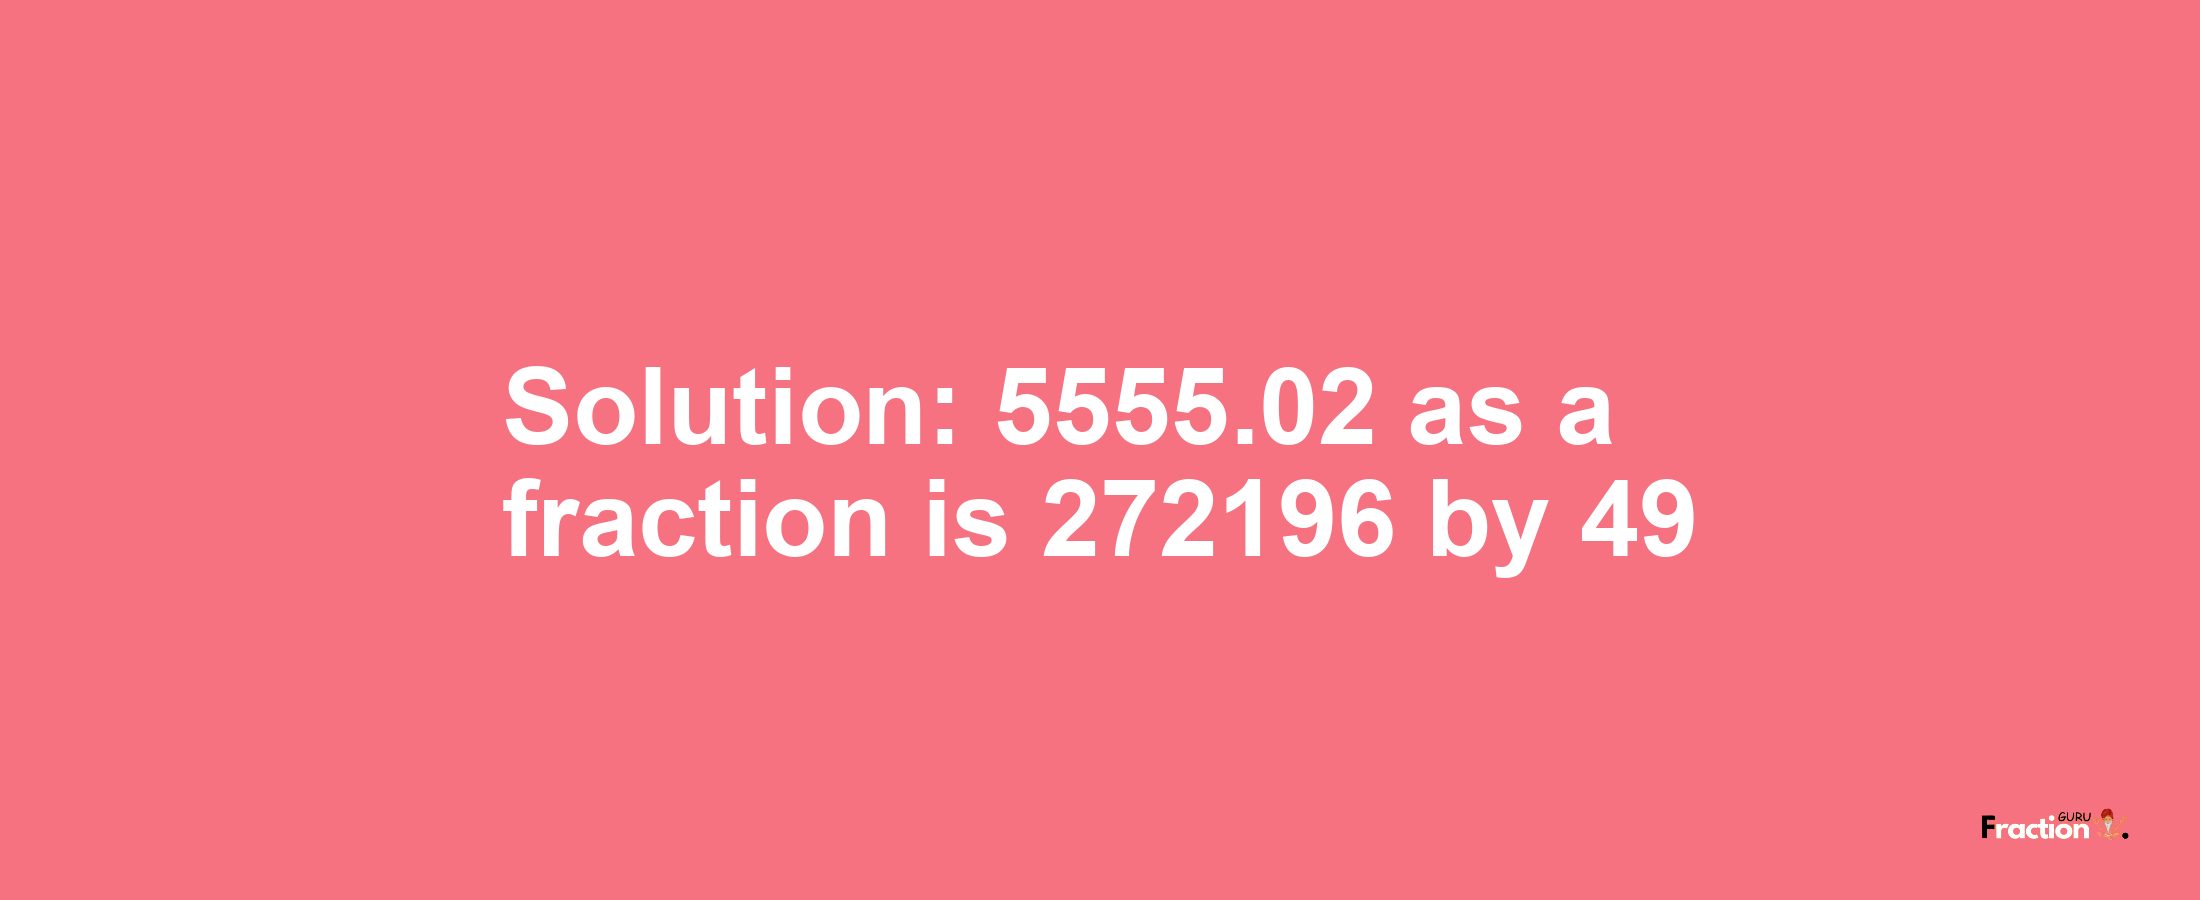 Solution:5555.02 as a fraction is 272196/49